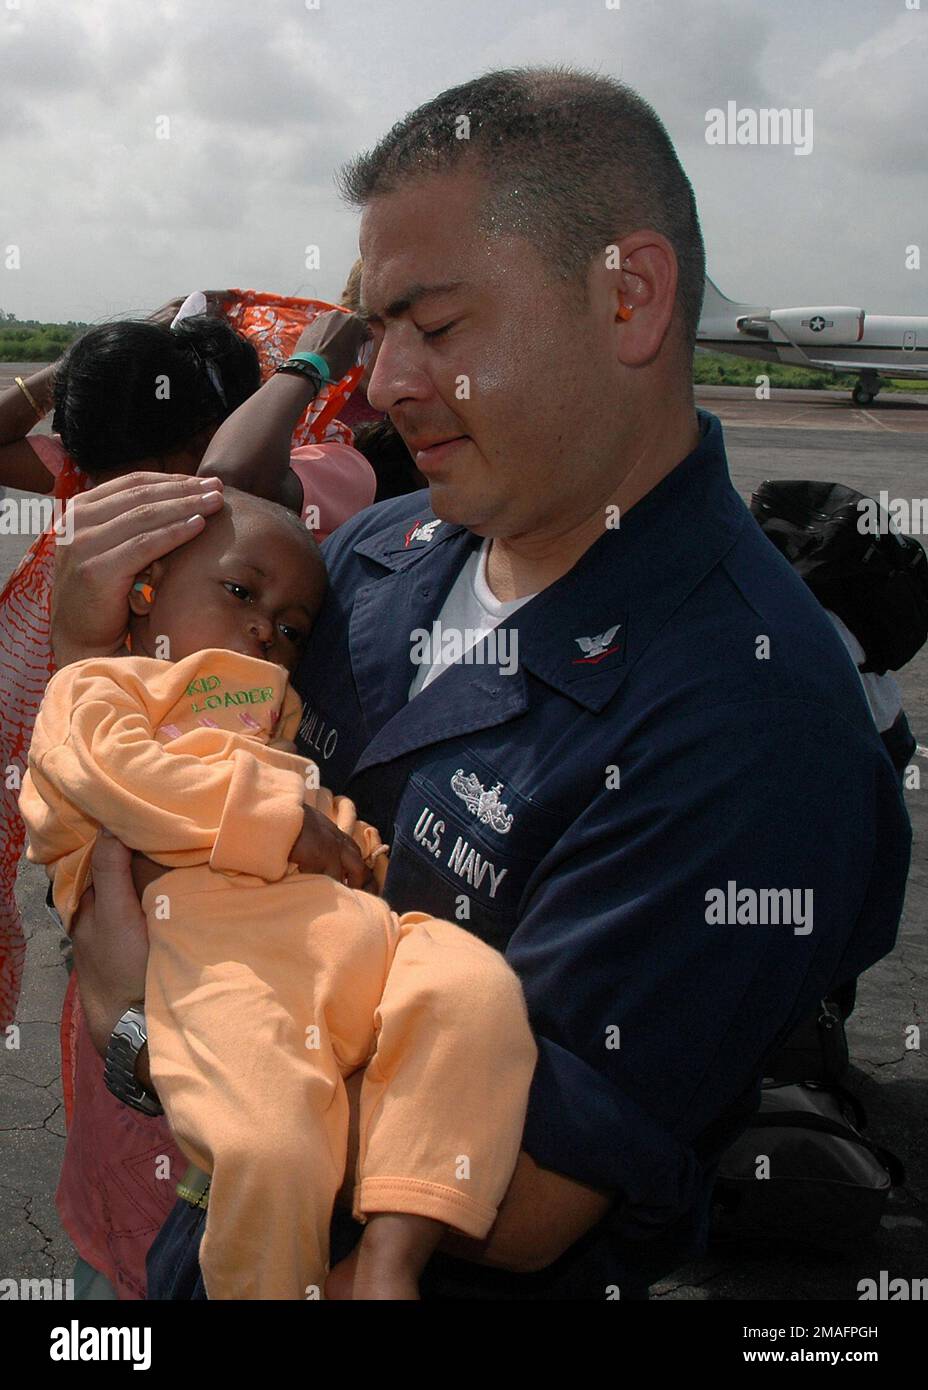 060705-N-3931M-013. [Complete] Scene Caption: US Navy (USN) Hospital Corpsman Third Class (HM3) Javier Jamamillo from the Medical Treatment Facility (MTF), USN Military Sealift Command (MSC) USNS MERCY (T-AH 19), comforts a child that underwent treatment aboard the MERCY at Chittagong Airport, Bangladesh (BGD), during the ship's humanitarian and civic assistance in the country. The MERCY is on a scheduled five-month deployment in Southeast Asia. Its mission is being carried out in close coordination and partnership with local medical care professionals and civilian volunteers from Project HOPE Stock Photo